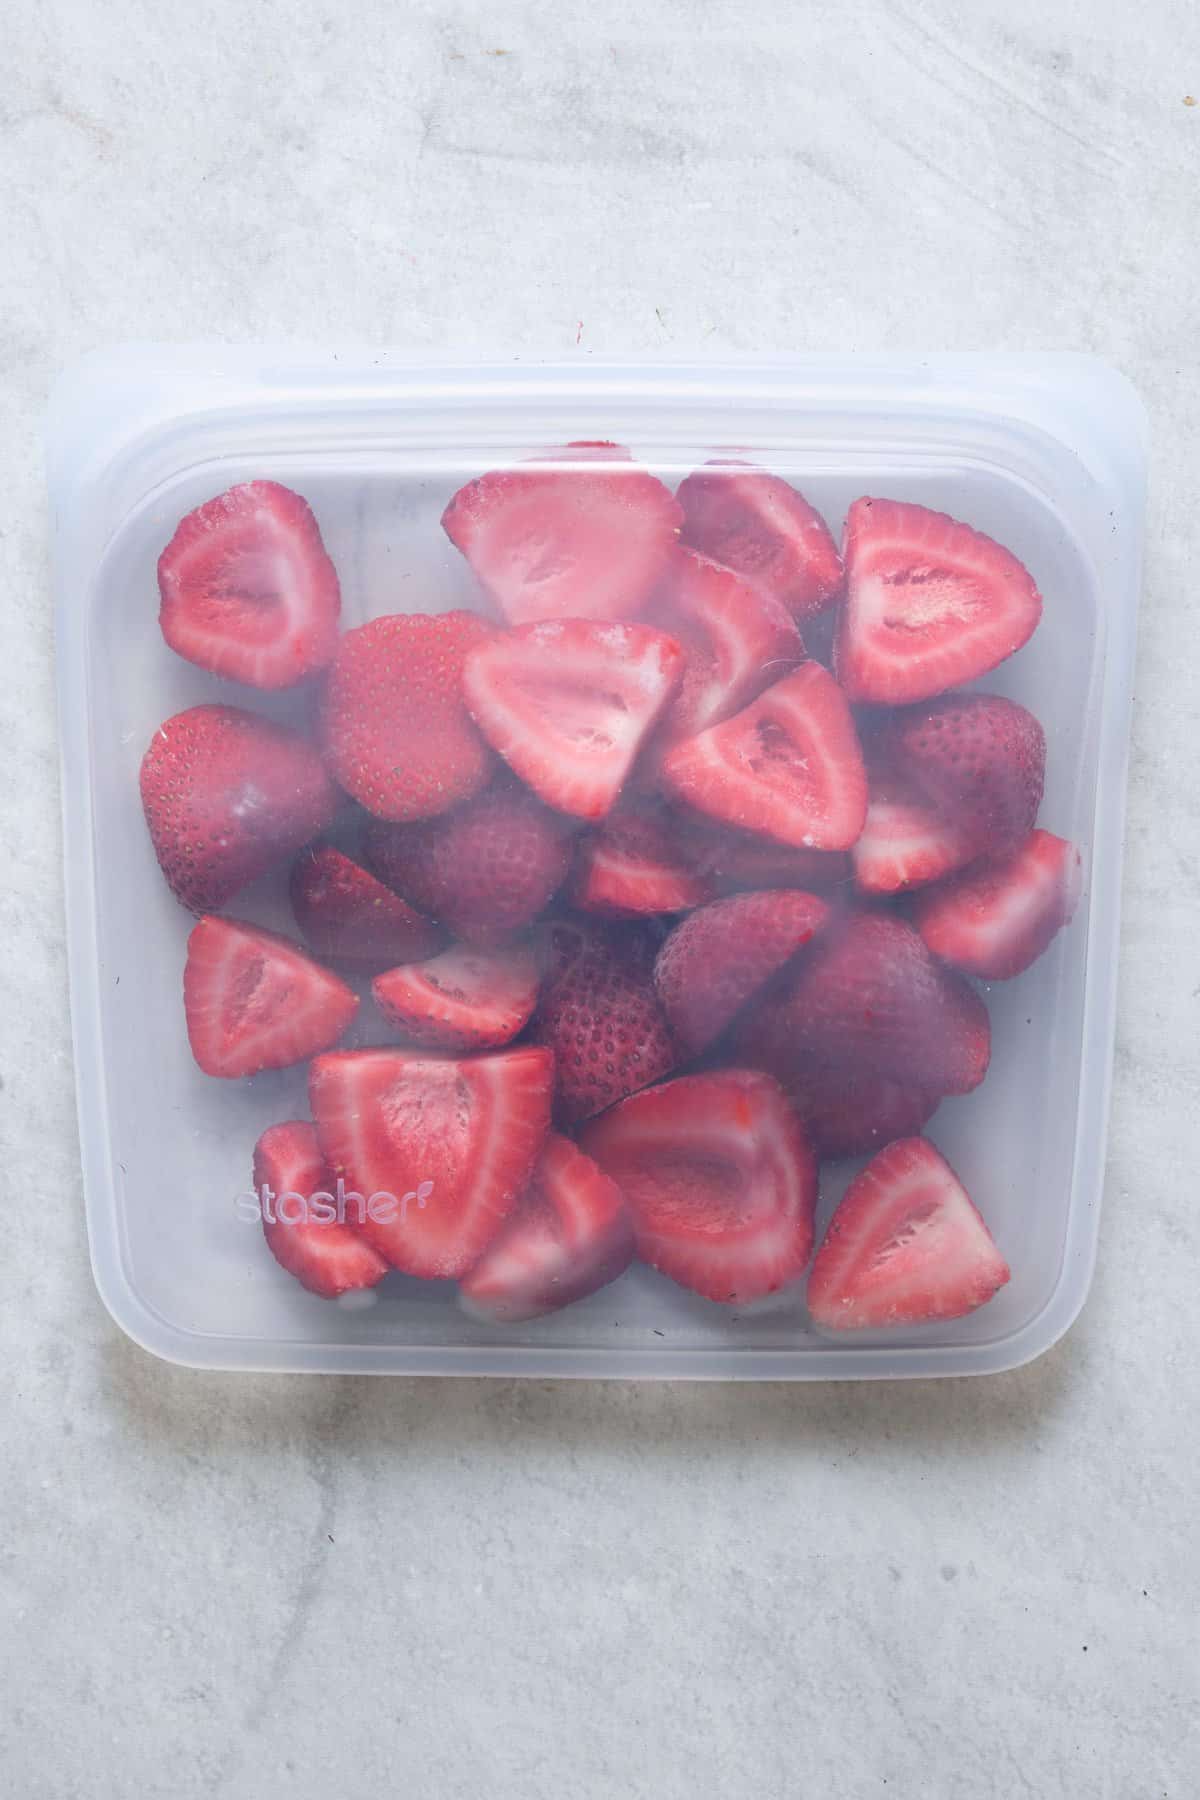 Strawberries in a clear silicone bag.